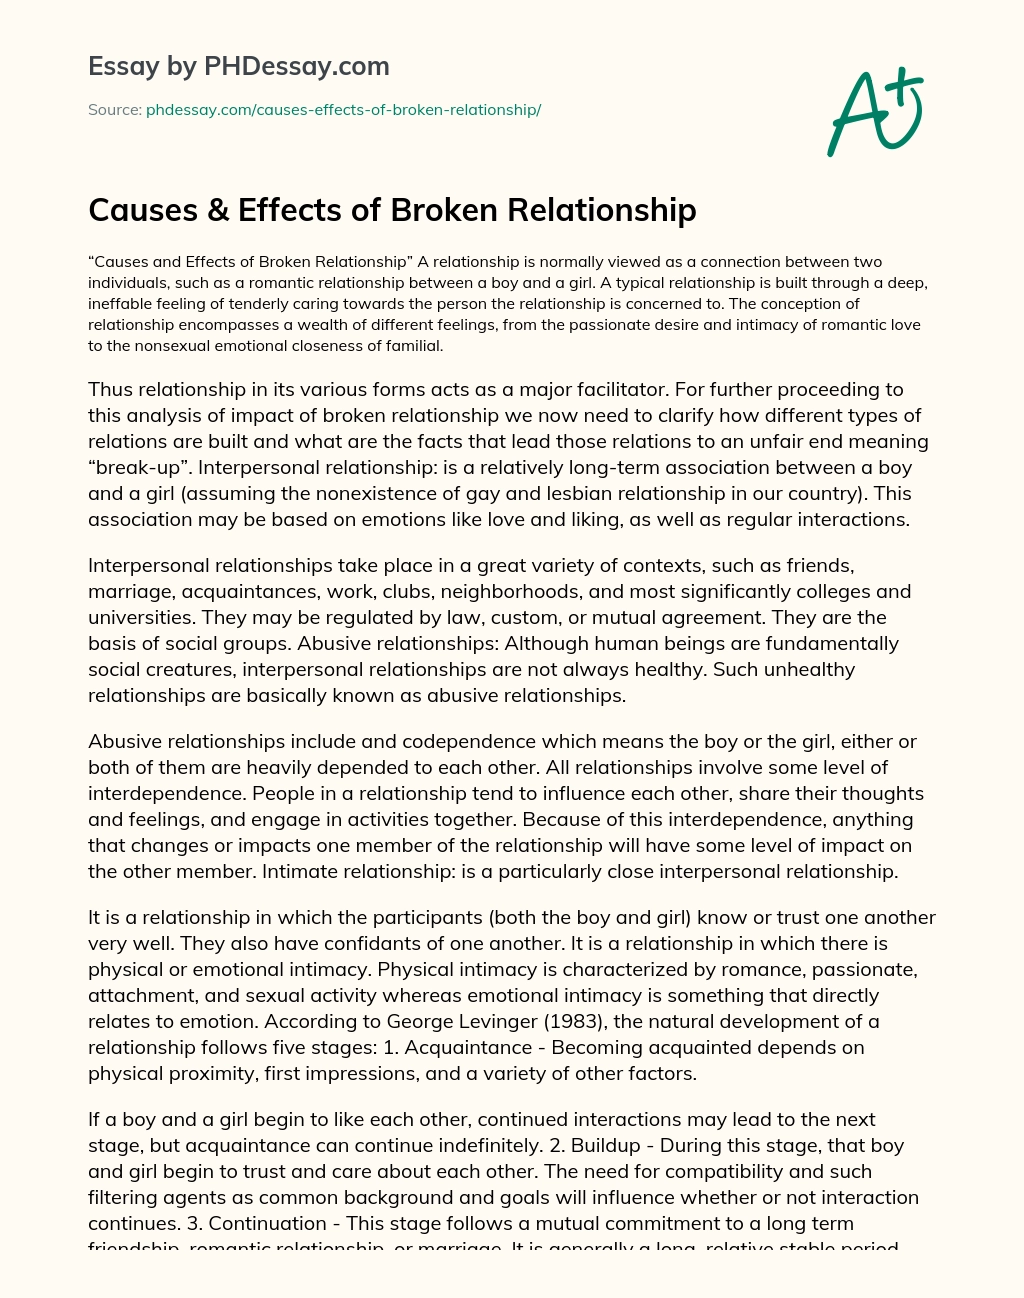 Causes & Effects of Broken Relationship essay